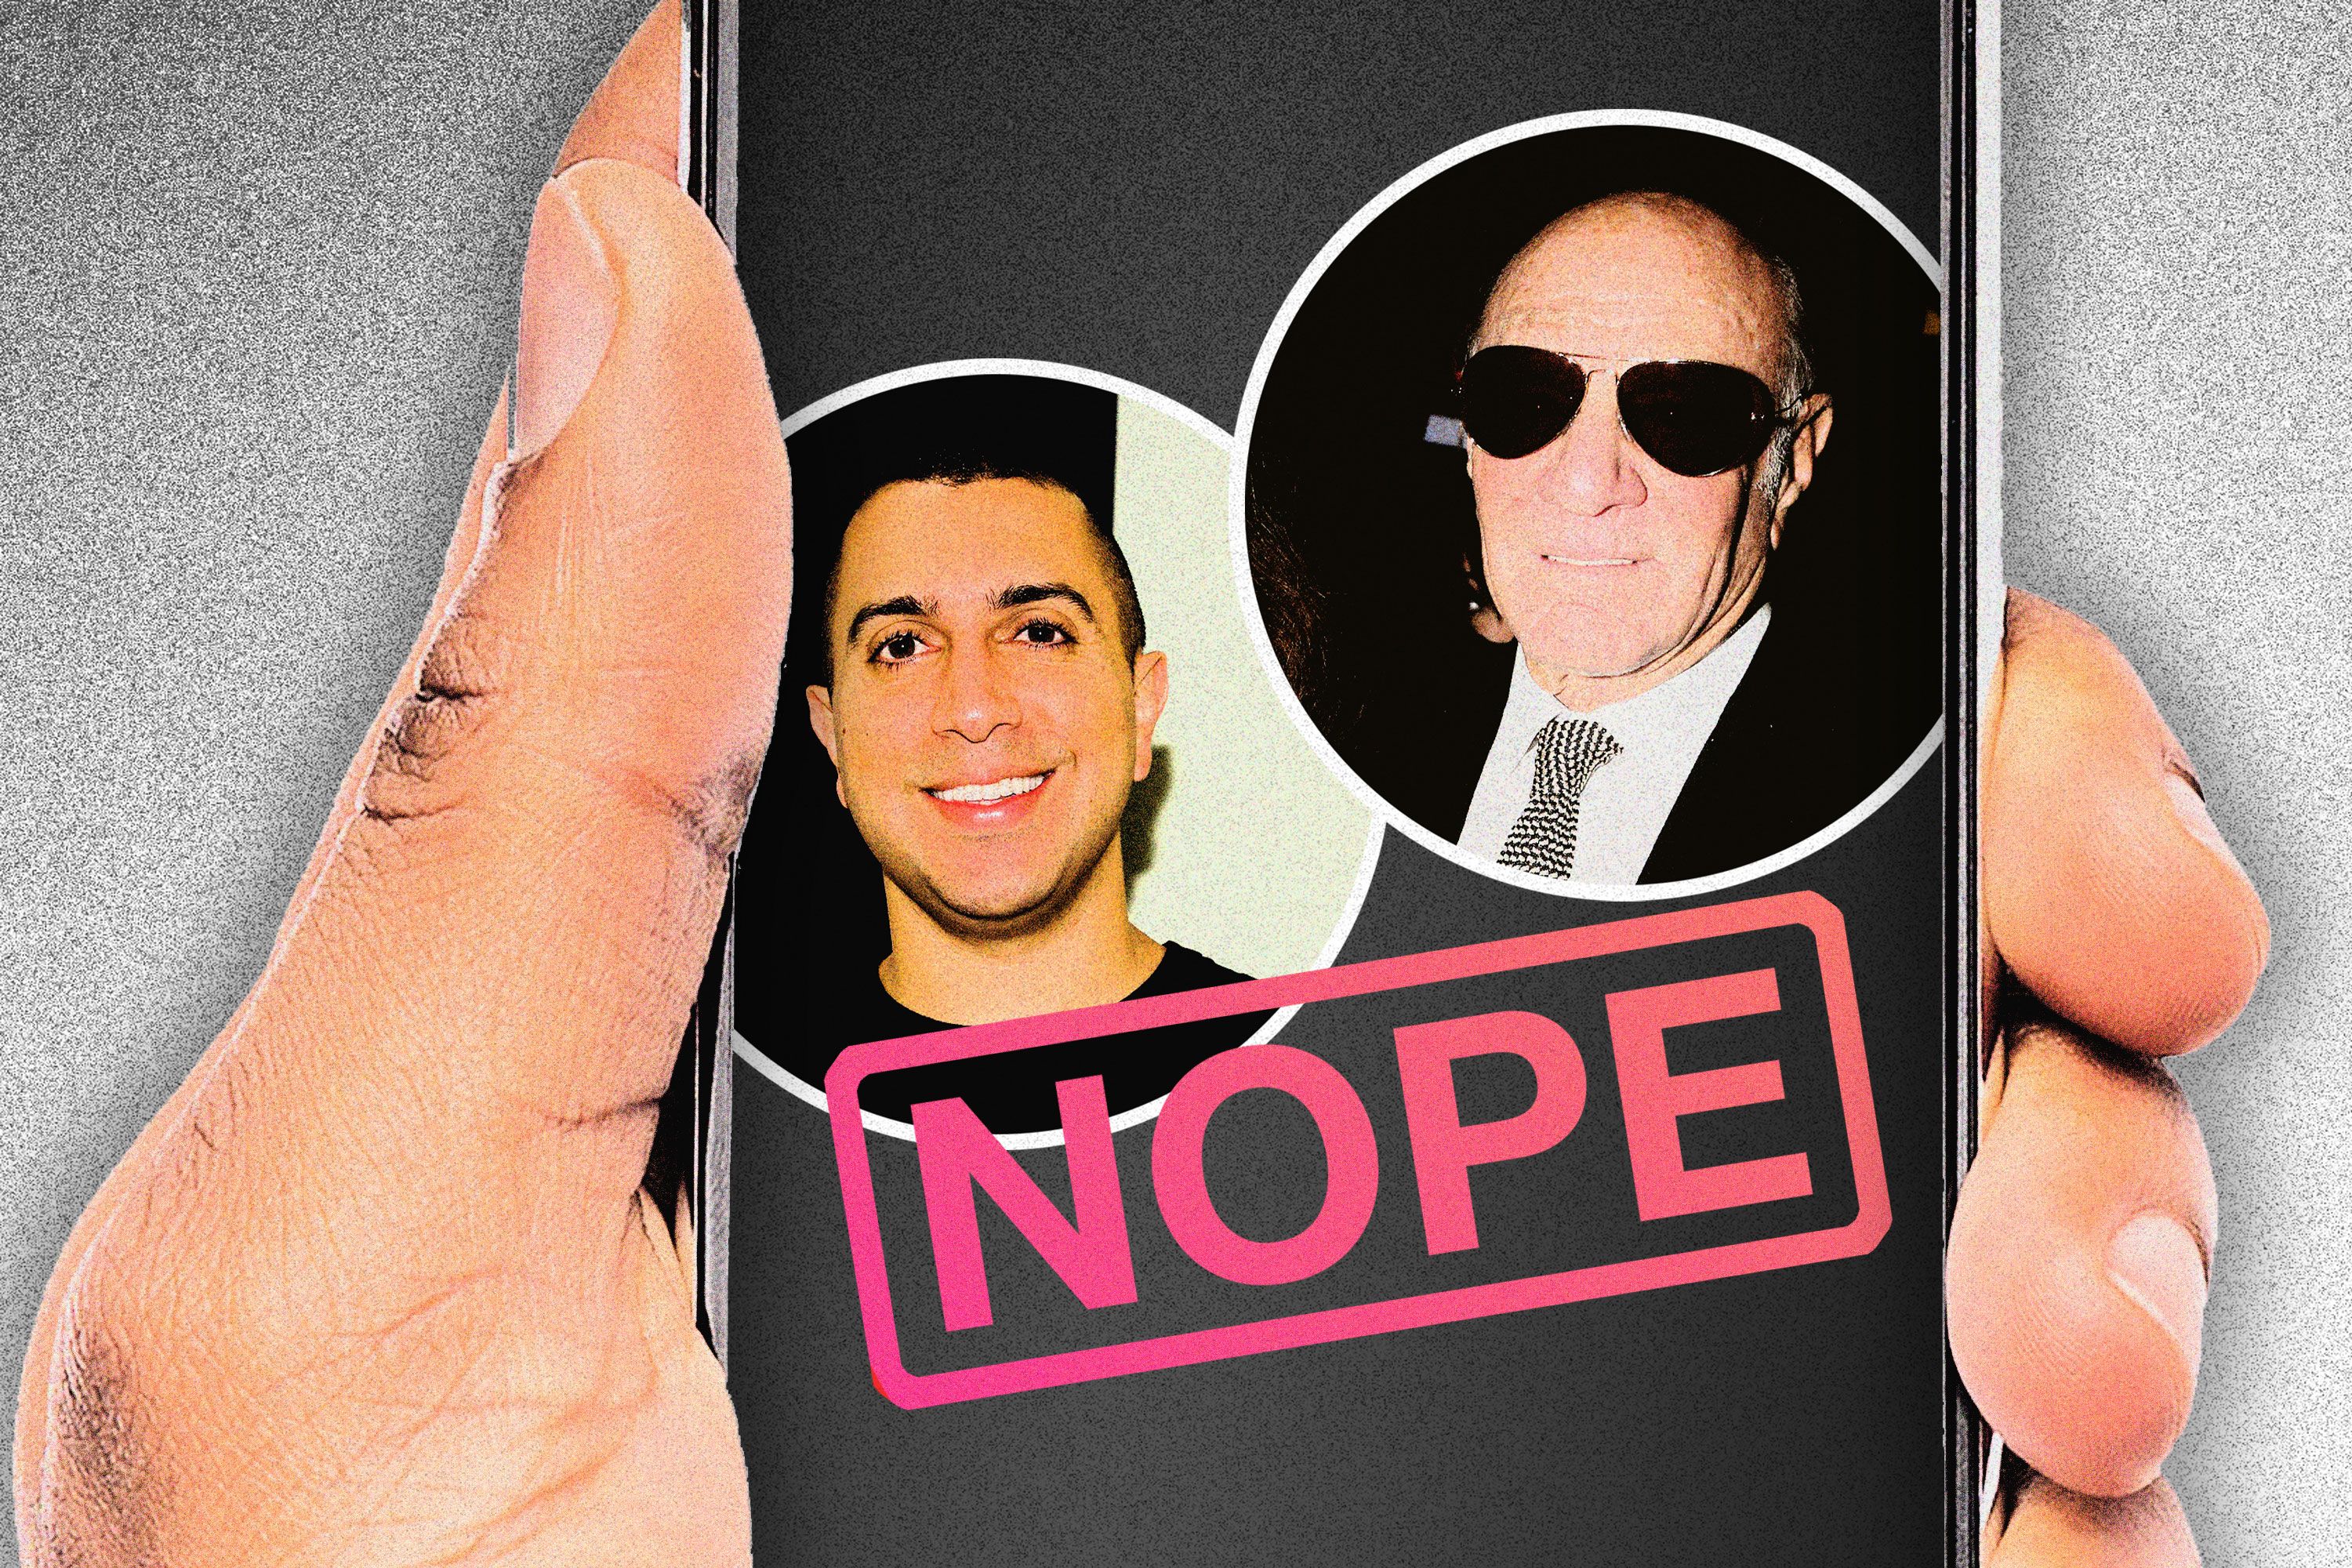 The Tinder Revenge Story Between Sean Rad and Barry Diller image pic